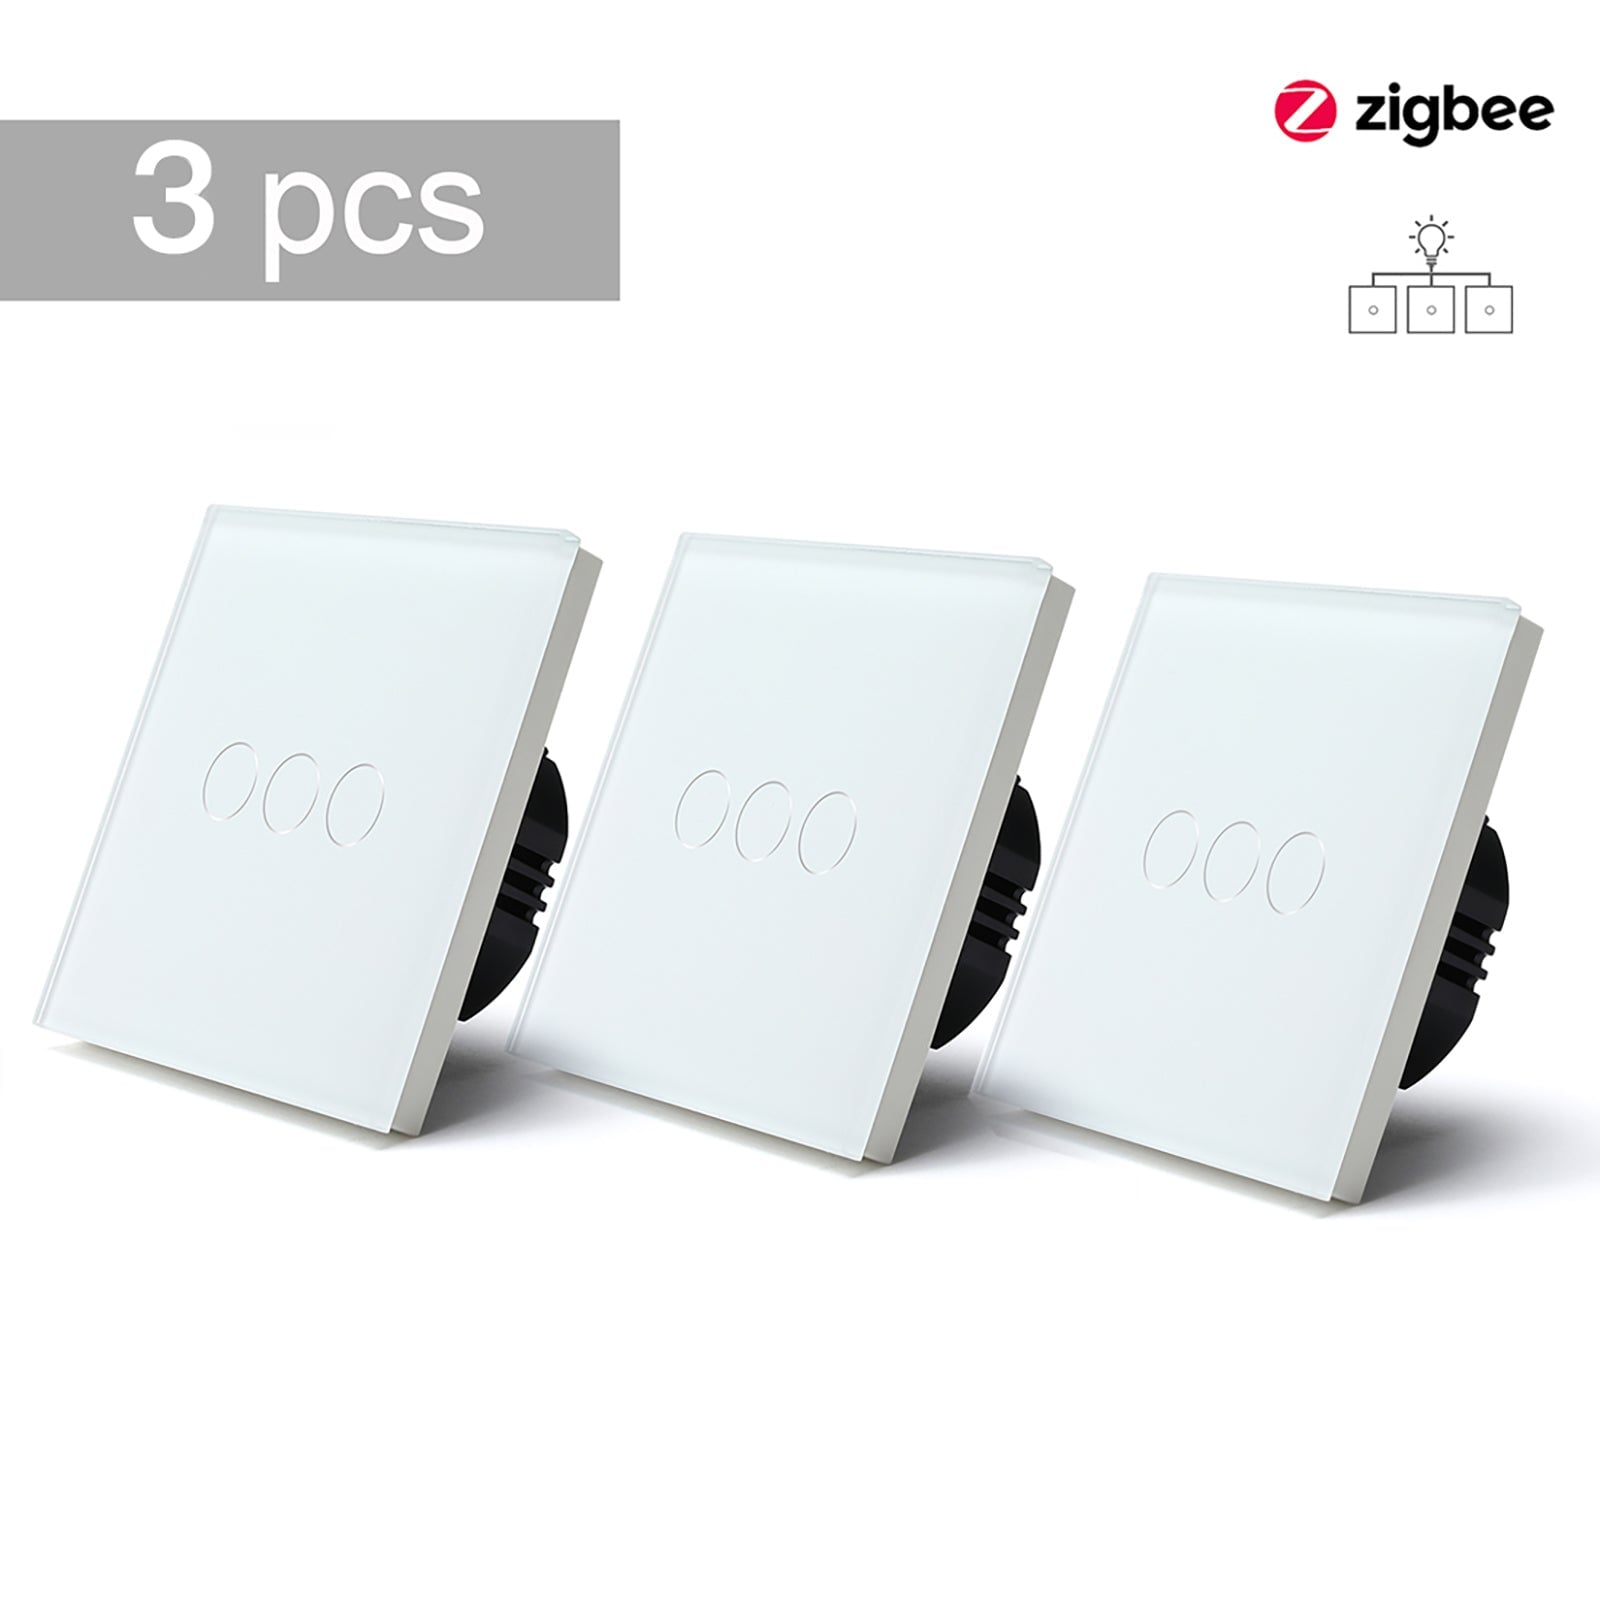 BSEED Zigbee Single Live Line Switch 1/2/3 Gang 1/2/3 Way Wall Smart Light Switch Single Live Line 1/2/3 pack Light Switches Bseedswitch White 3Gang 3 Pcs/Pack